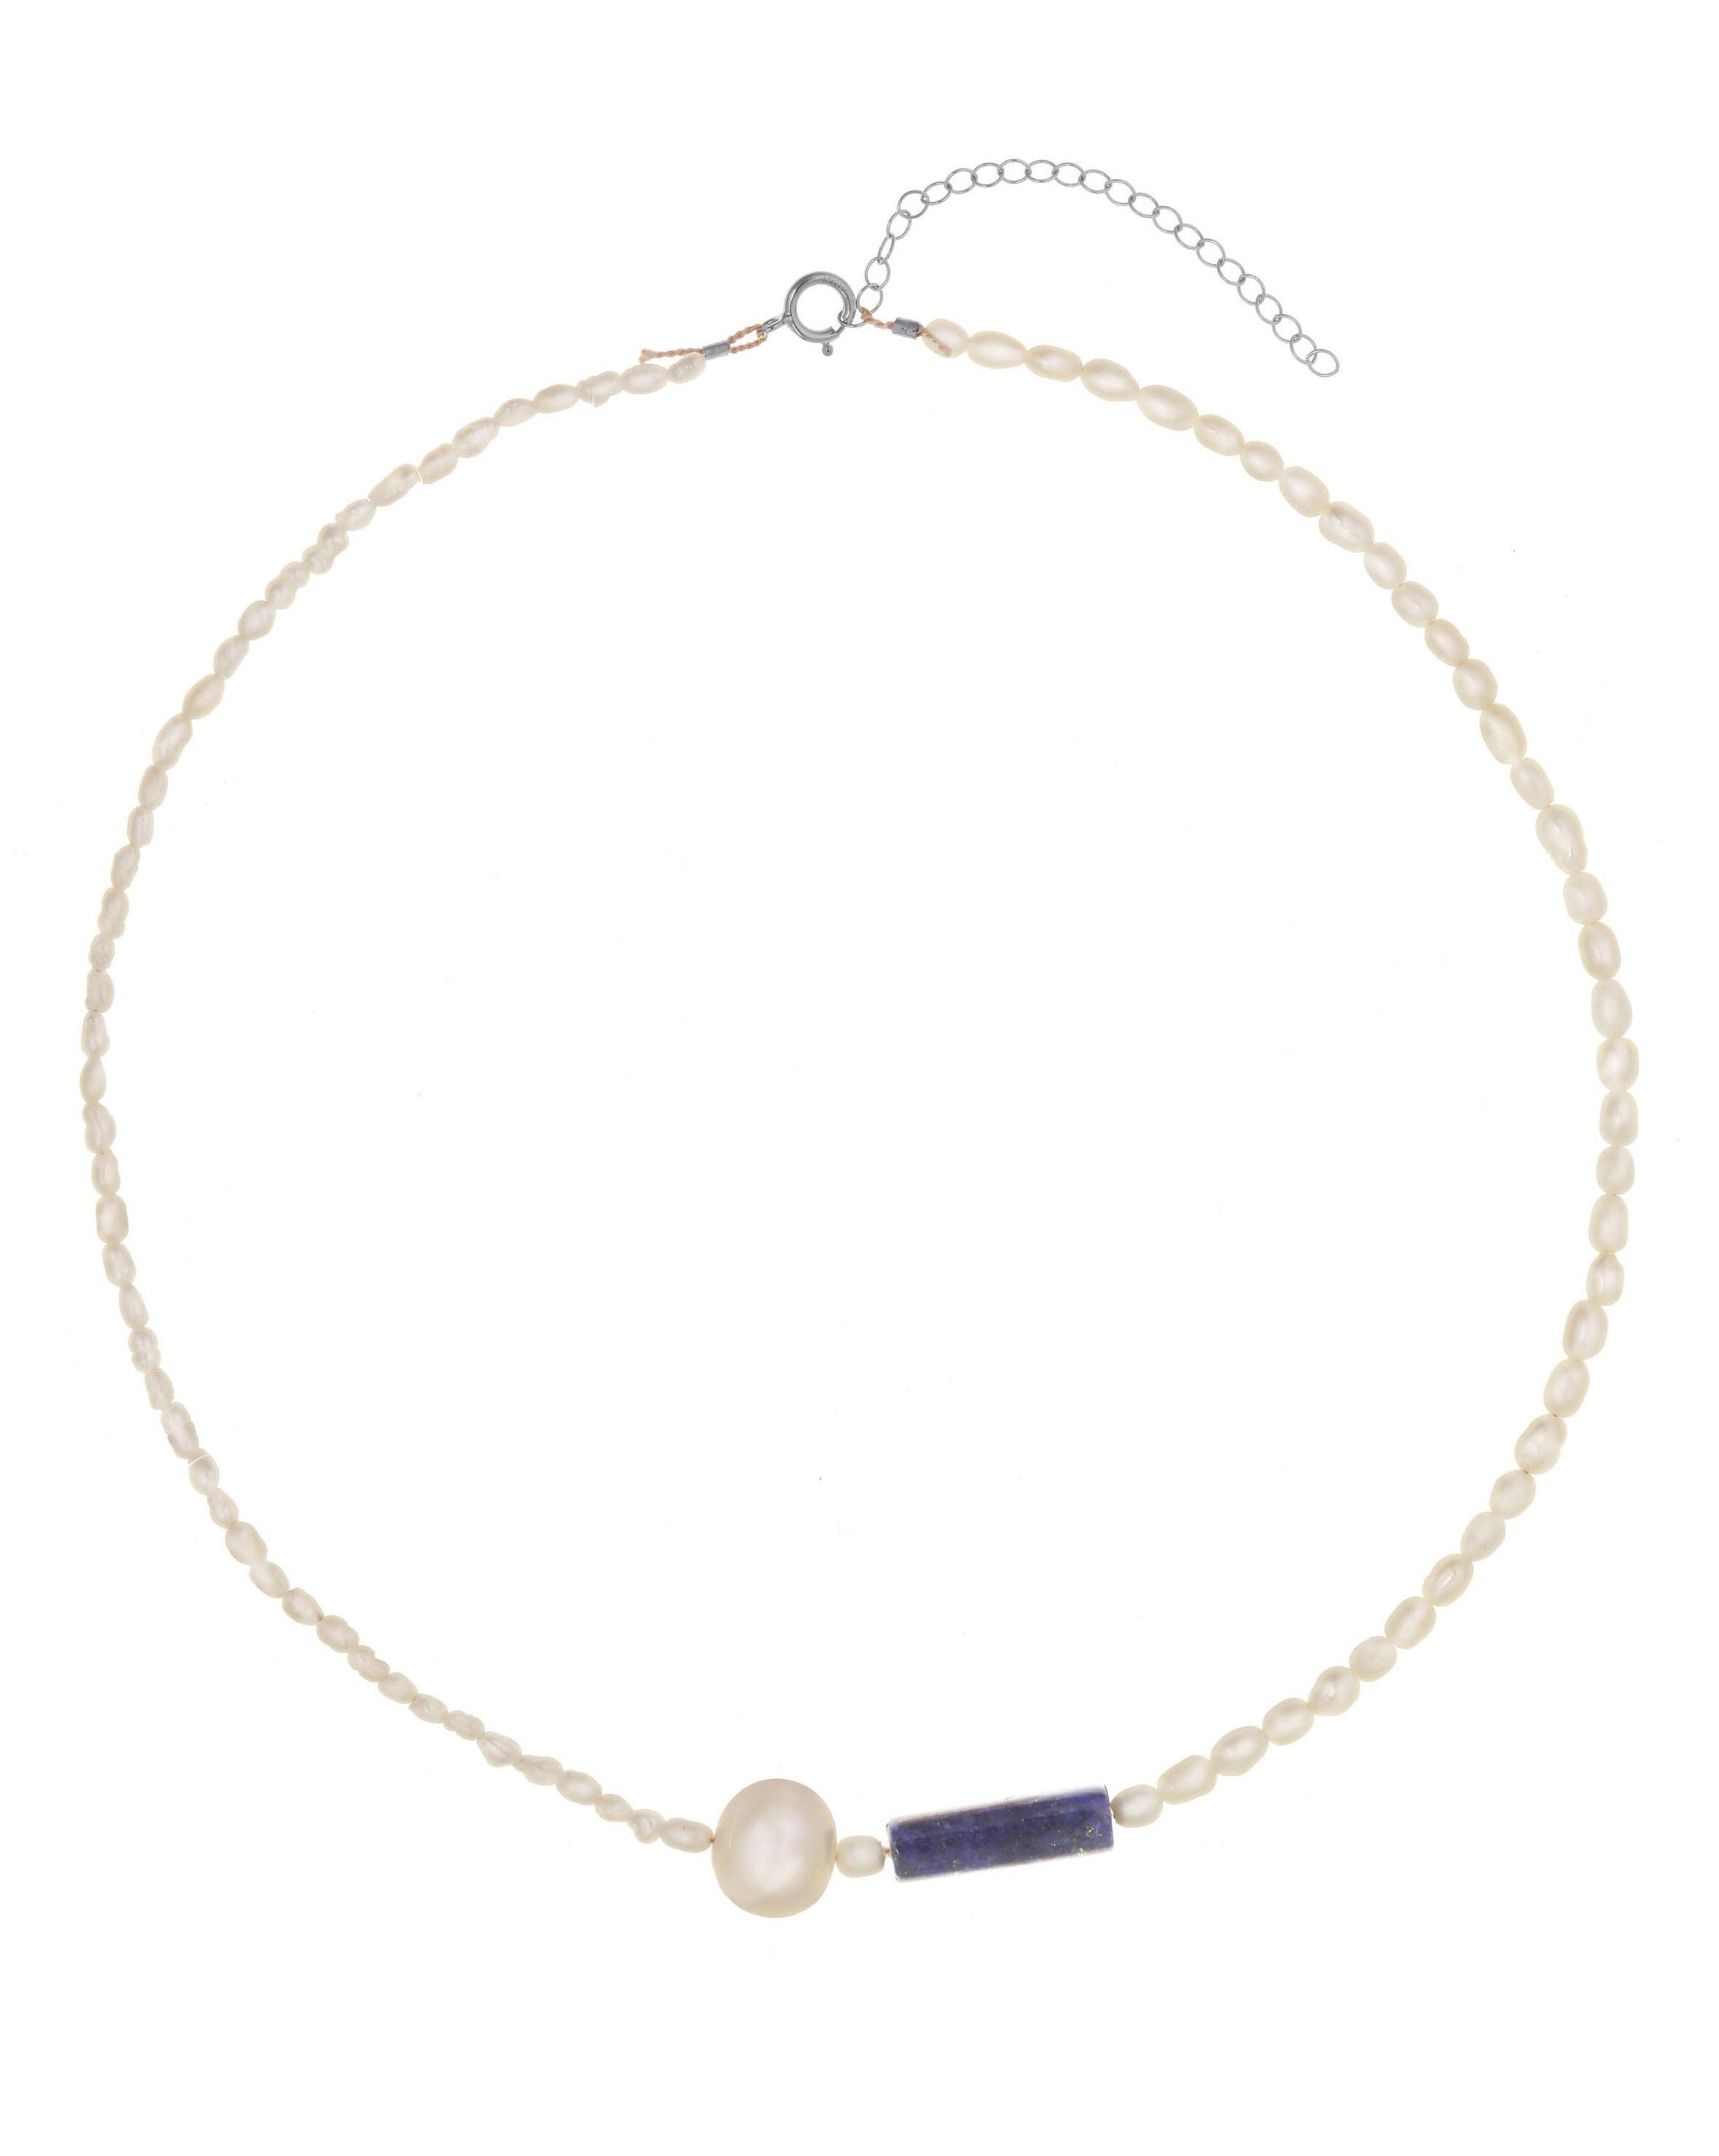 Wisdomkeeper Necklace by KOZAKH. A 15 to 17 inch adjustable length, freshwater rice pearl strand necklace, clasp crafted in Sterling Silver, featuring a round Freshwater Pearl and a cylindrical cut Lapis. 